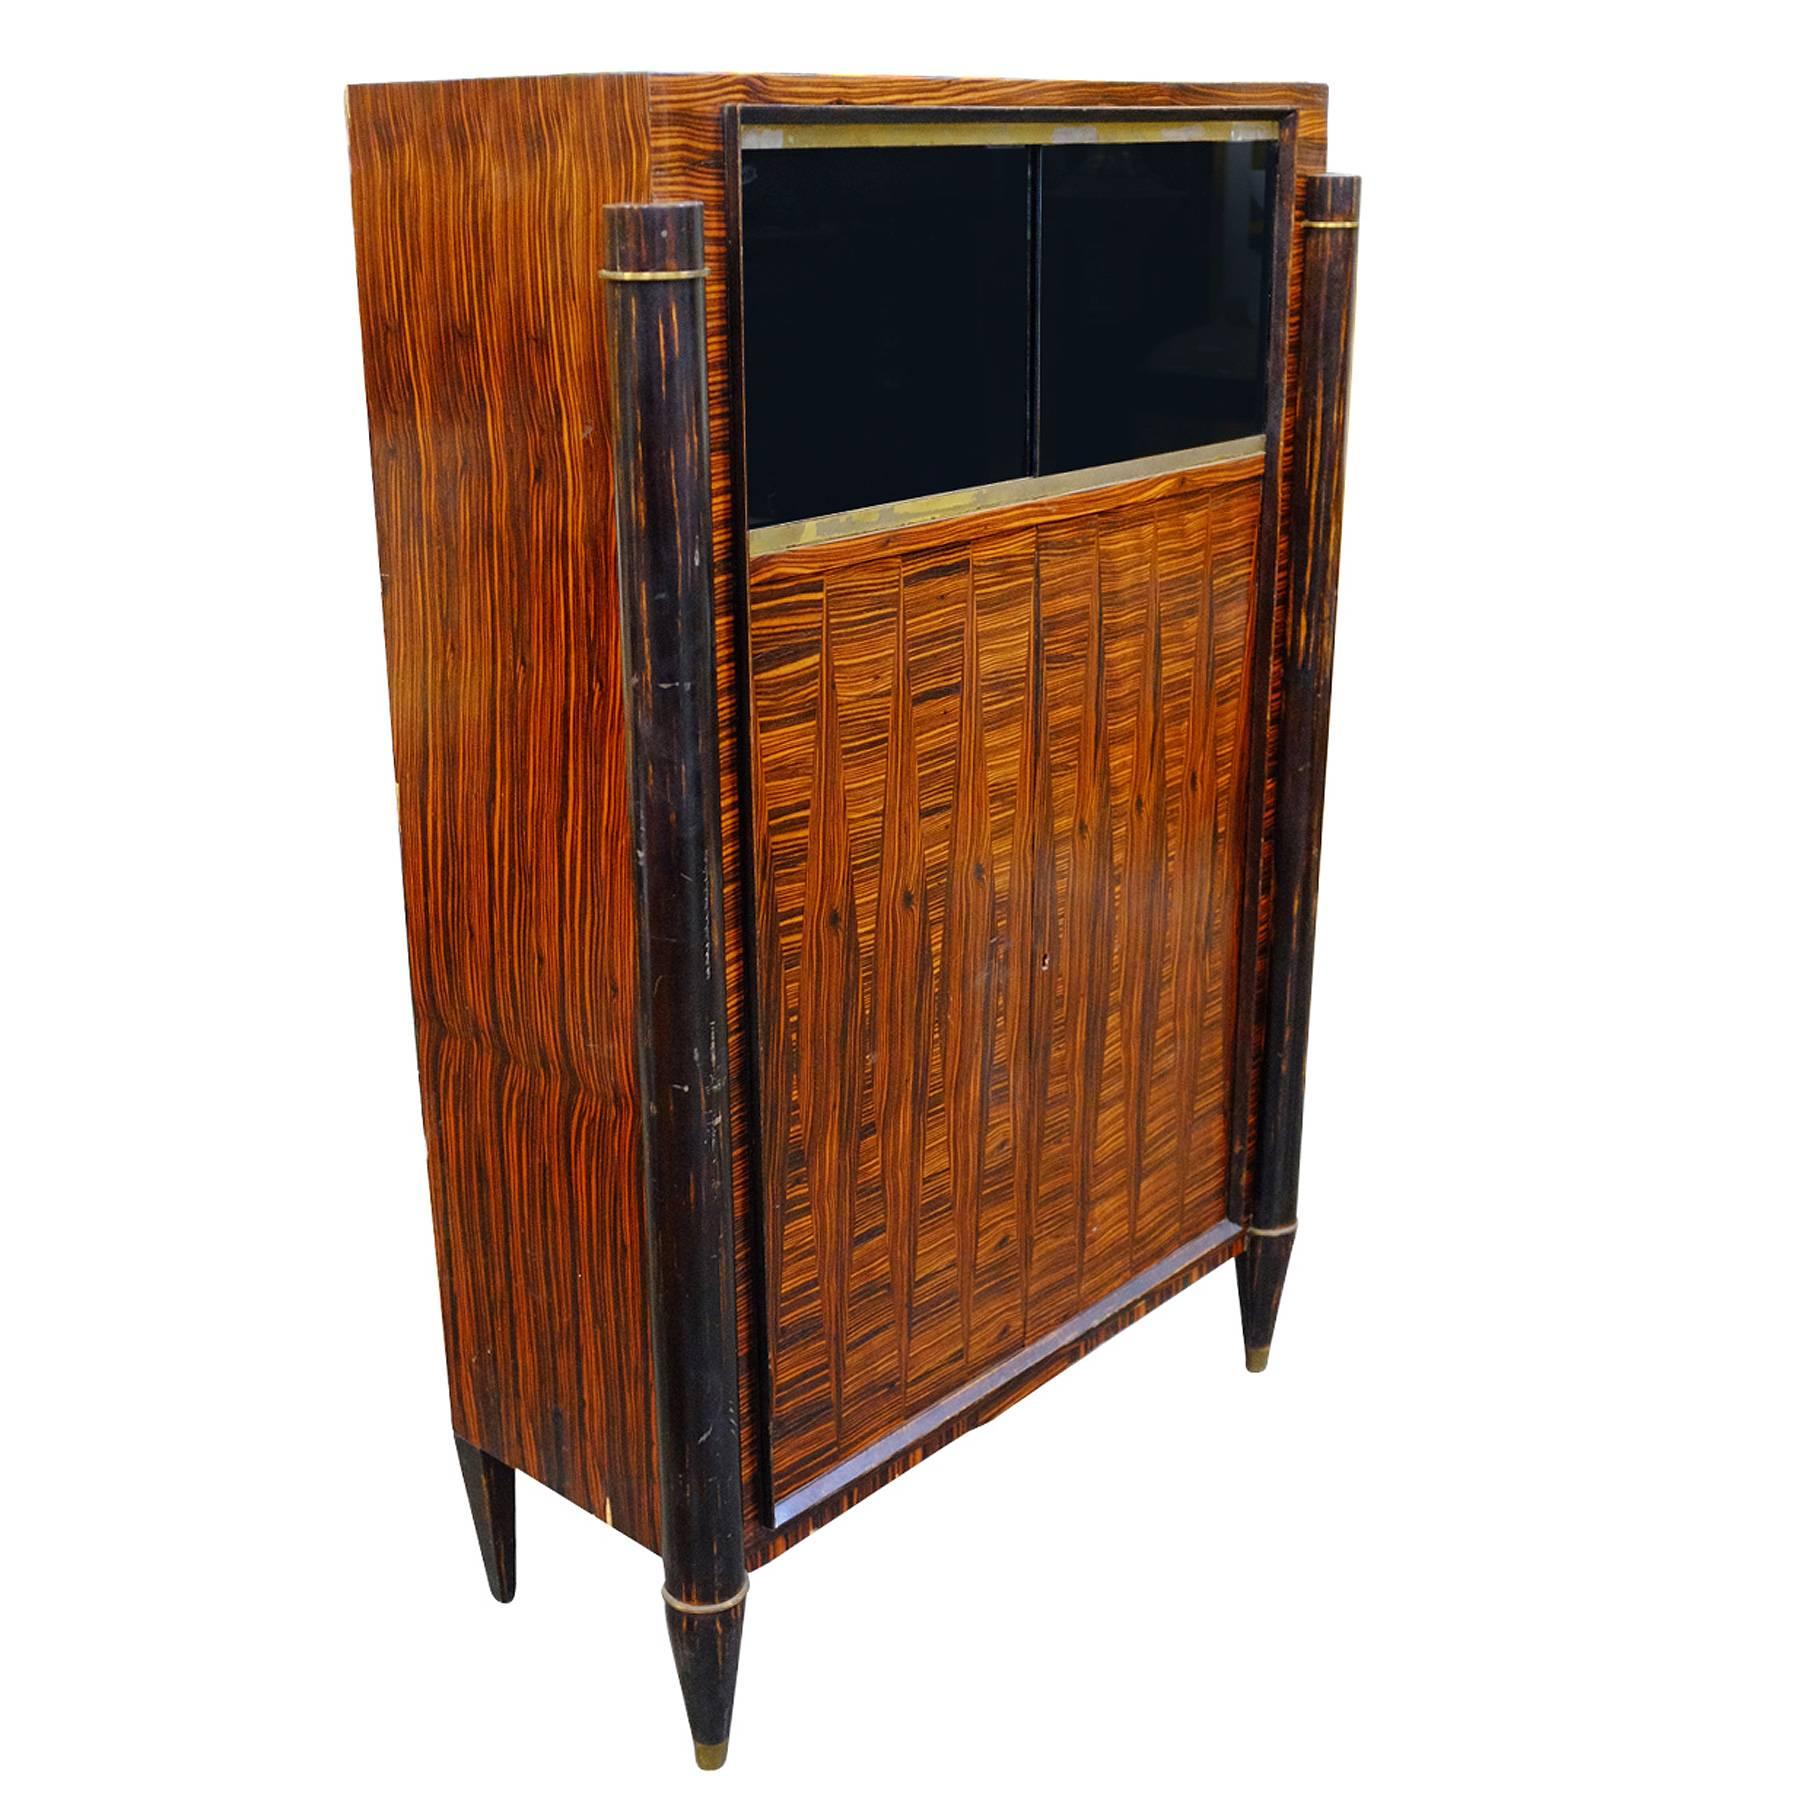 Rare French vitrine cabinet with a dark stained Macassar veneer and two smoked glass sliding doors. On the interior you will find bright maple wood framed by a bronze accent. Underneath are large doors which open up to adjustable shelving for